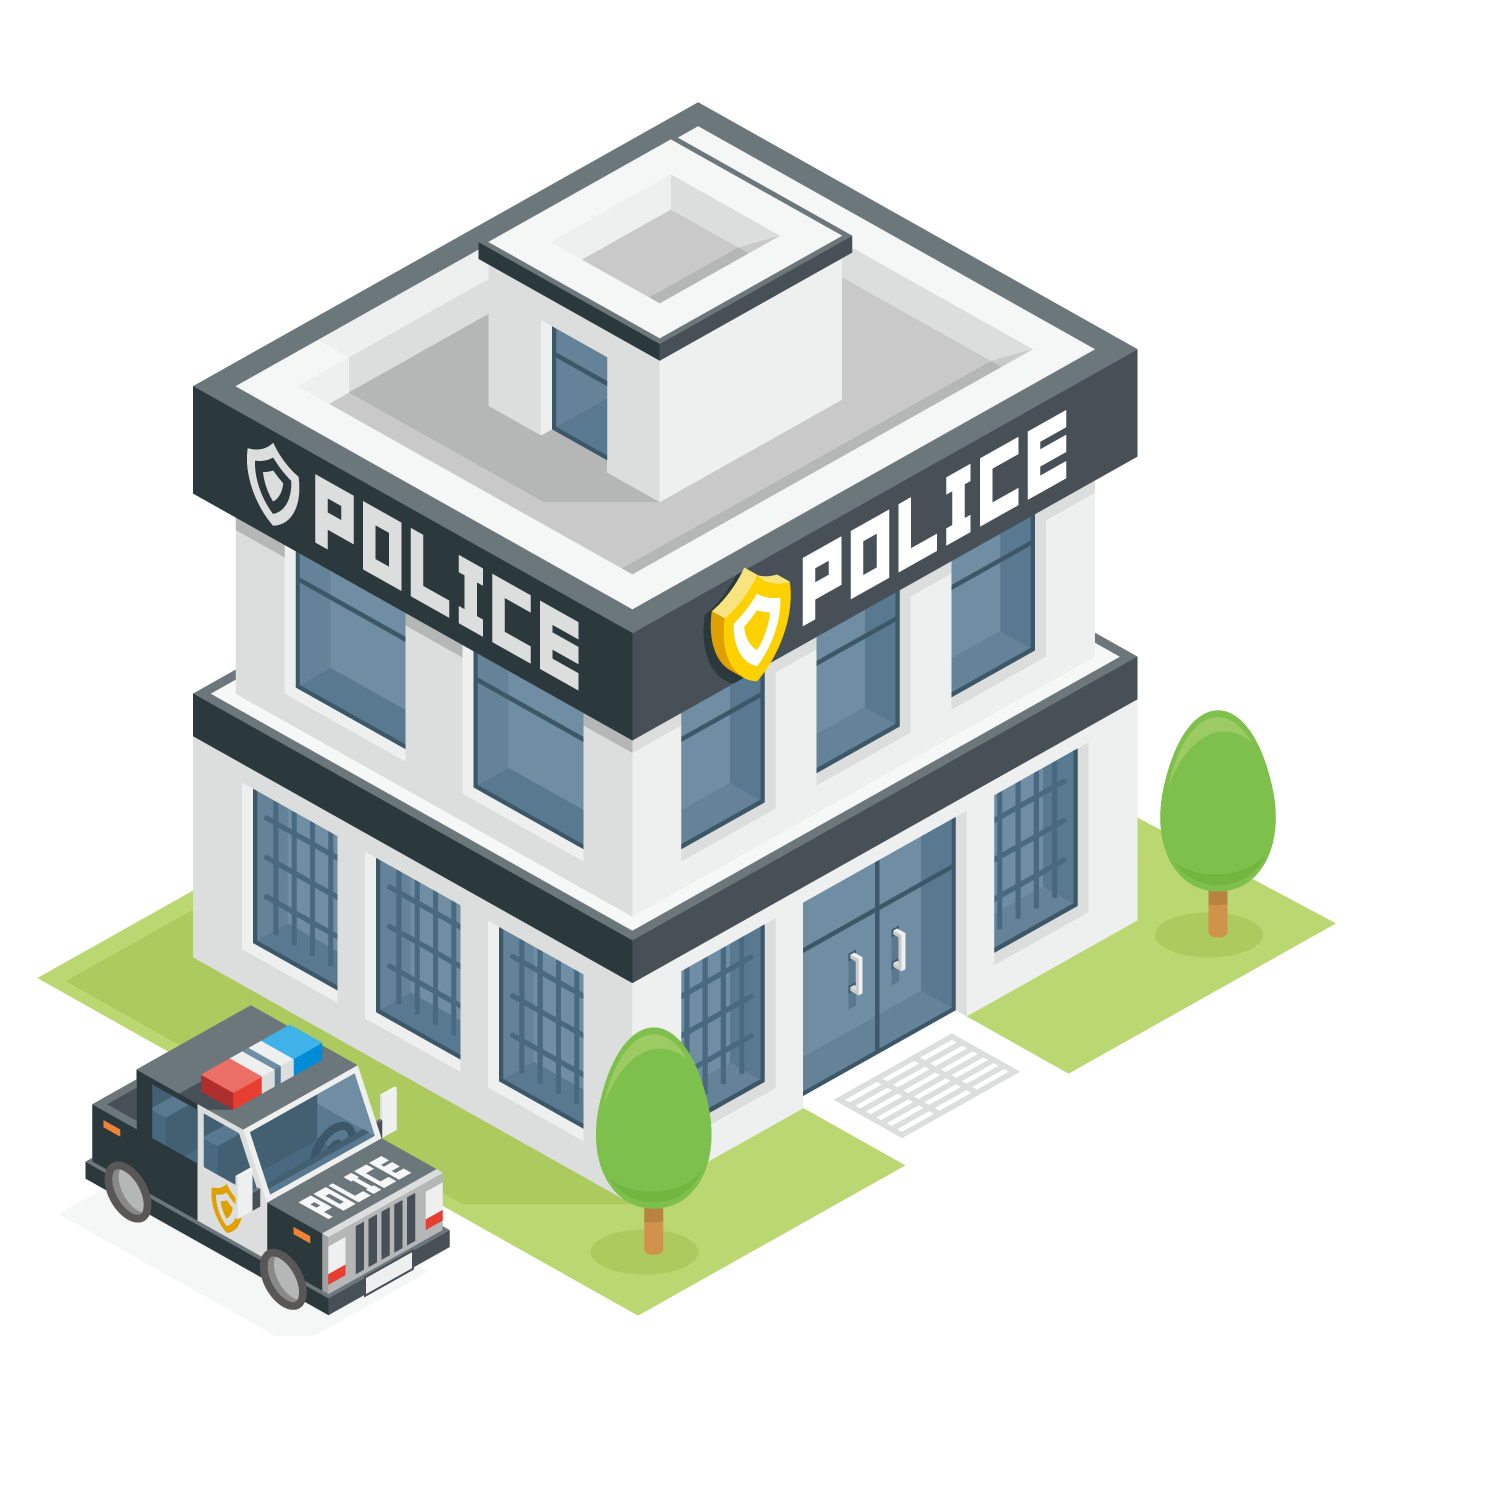 Police clipart police station, Police police station Transparent FREE